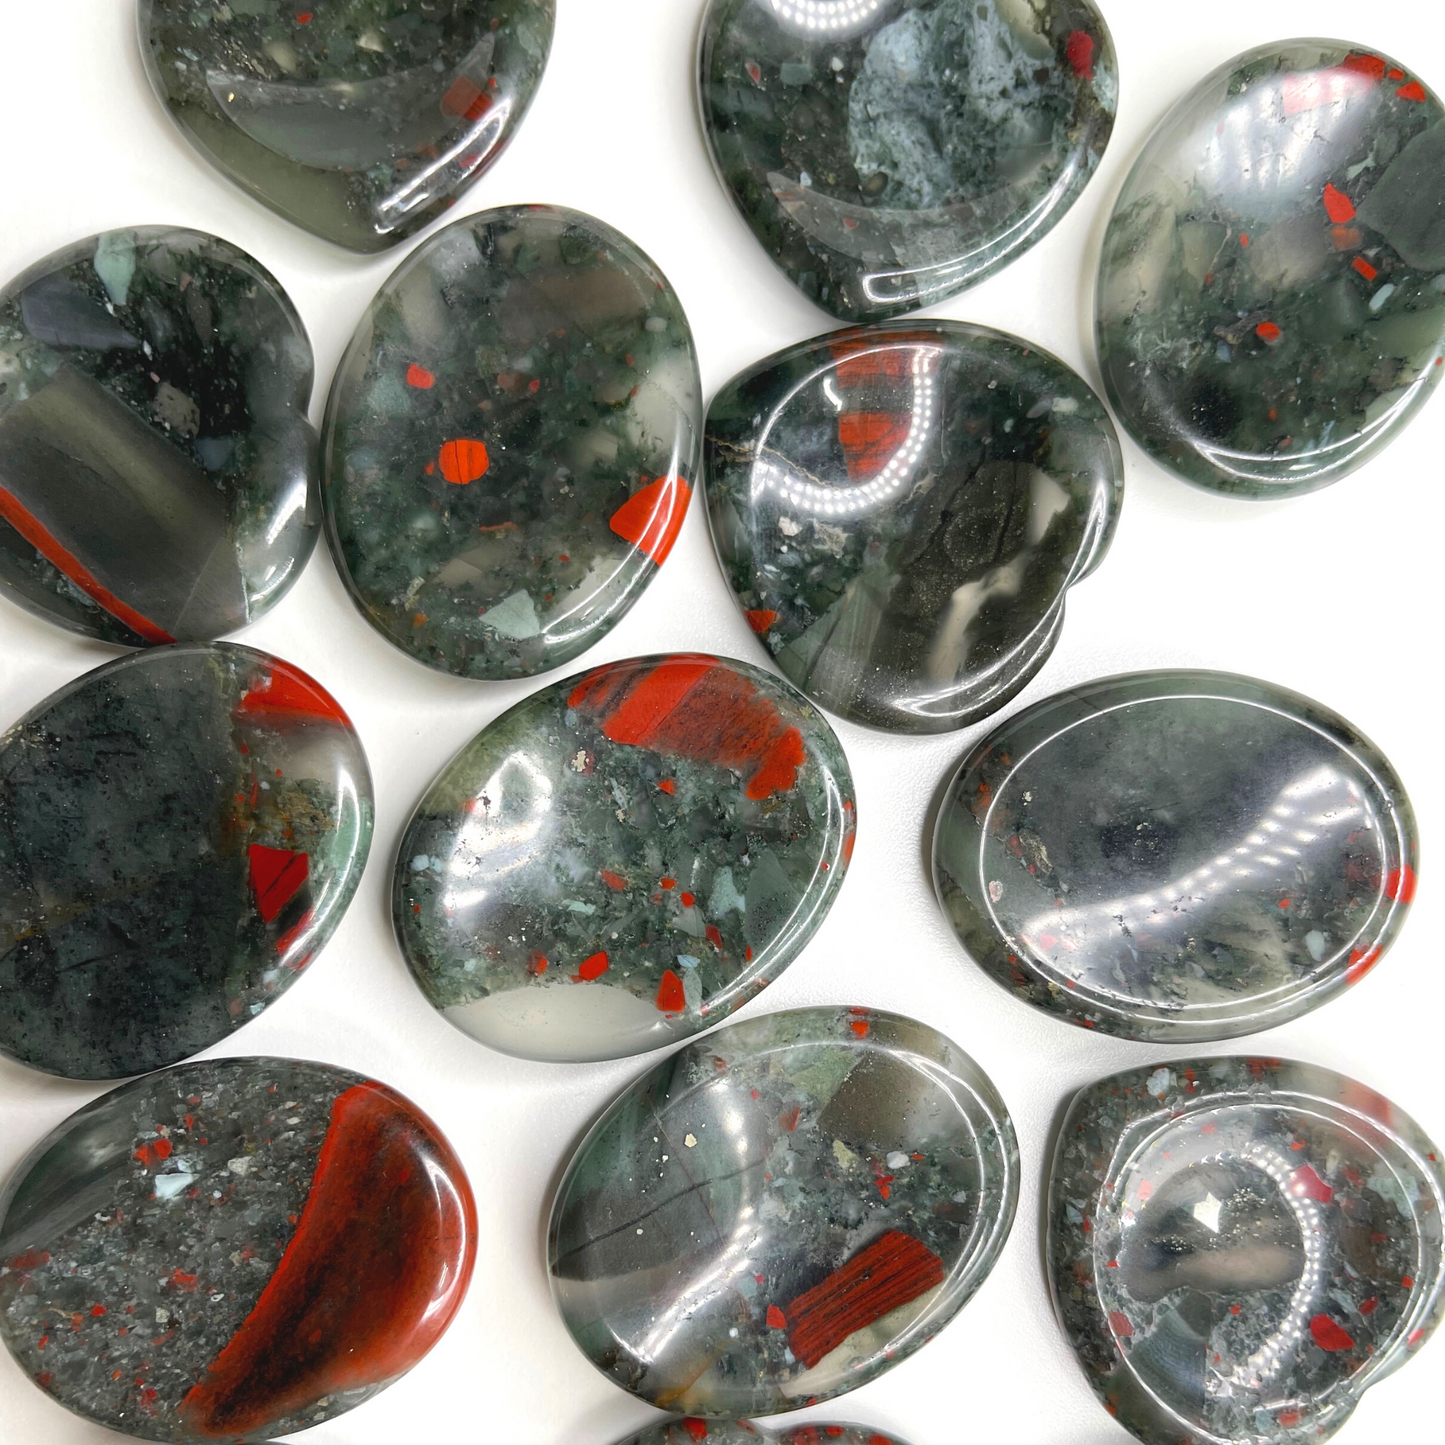 African Bloodstone Worry Stone